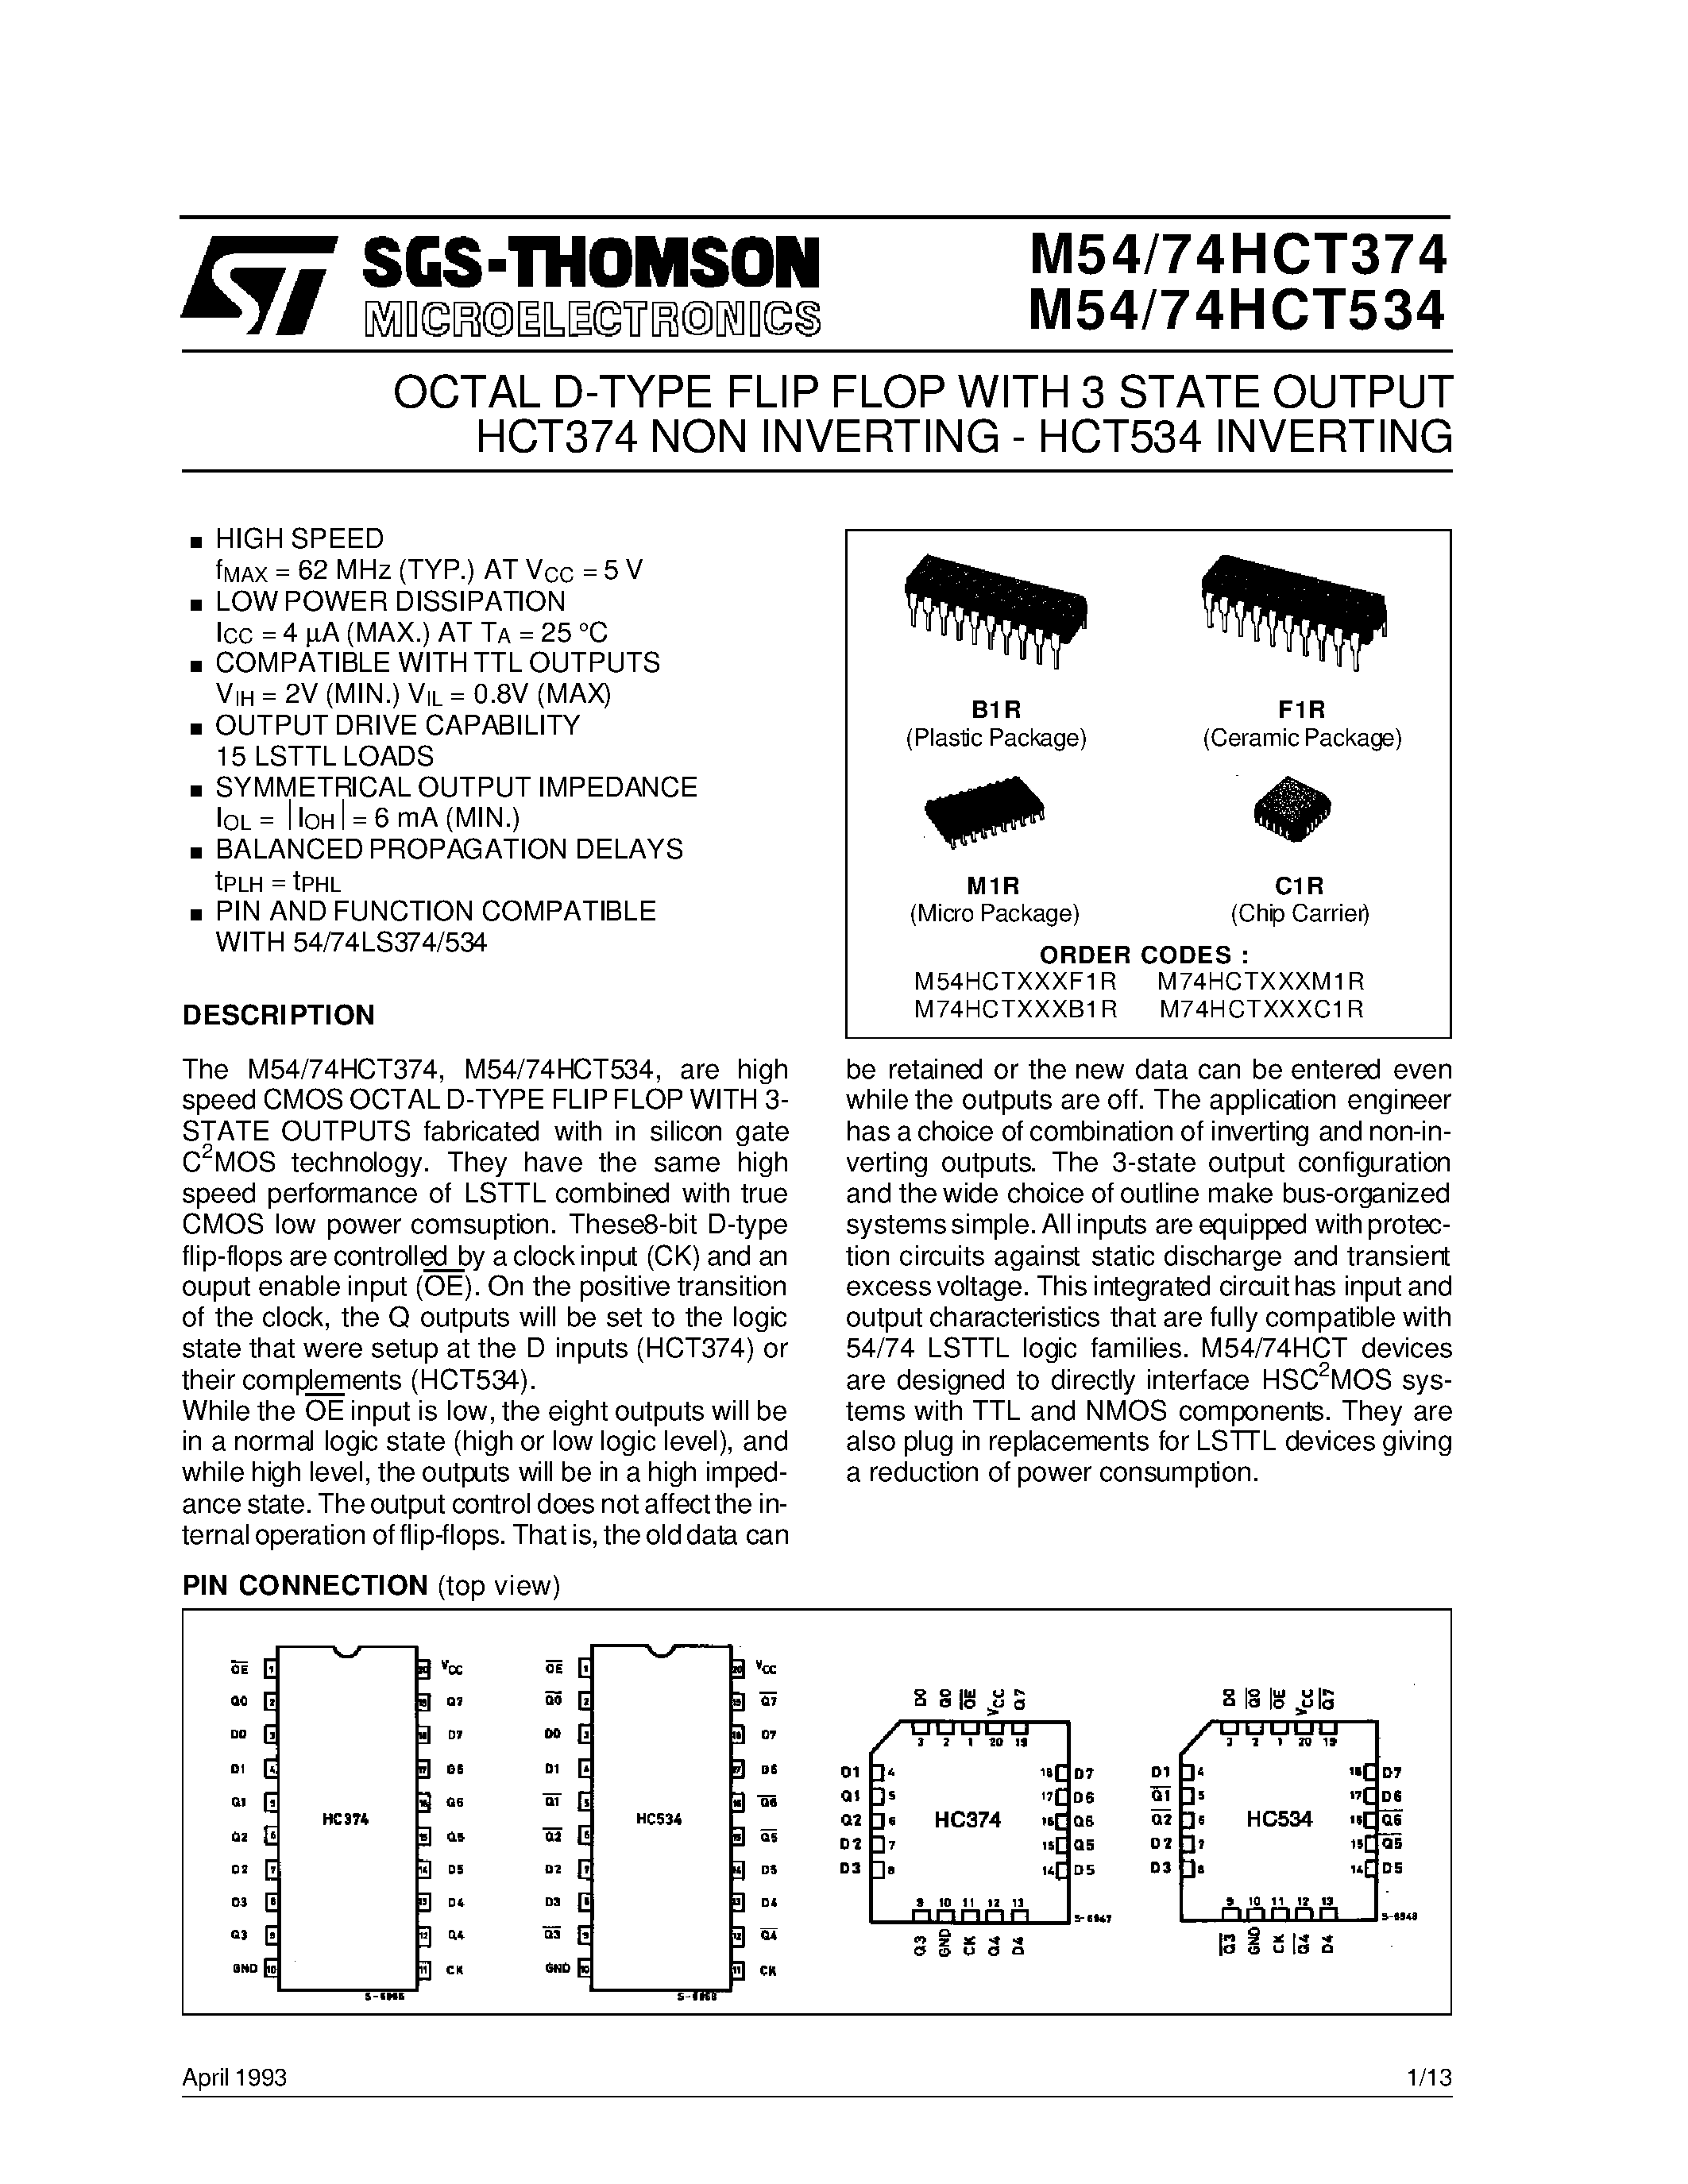 Datasheet M74HCT534 - OCTAL D-TYPE FLIP FLOP WITH 3 STATE OUTPUT HCT374 NON INVERTING - HCT534 INVERTING page 1